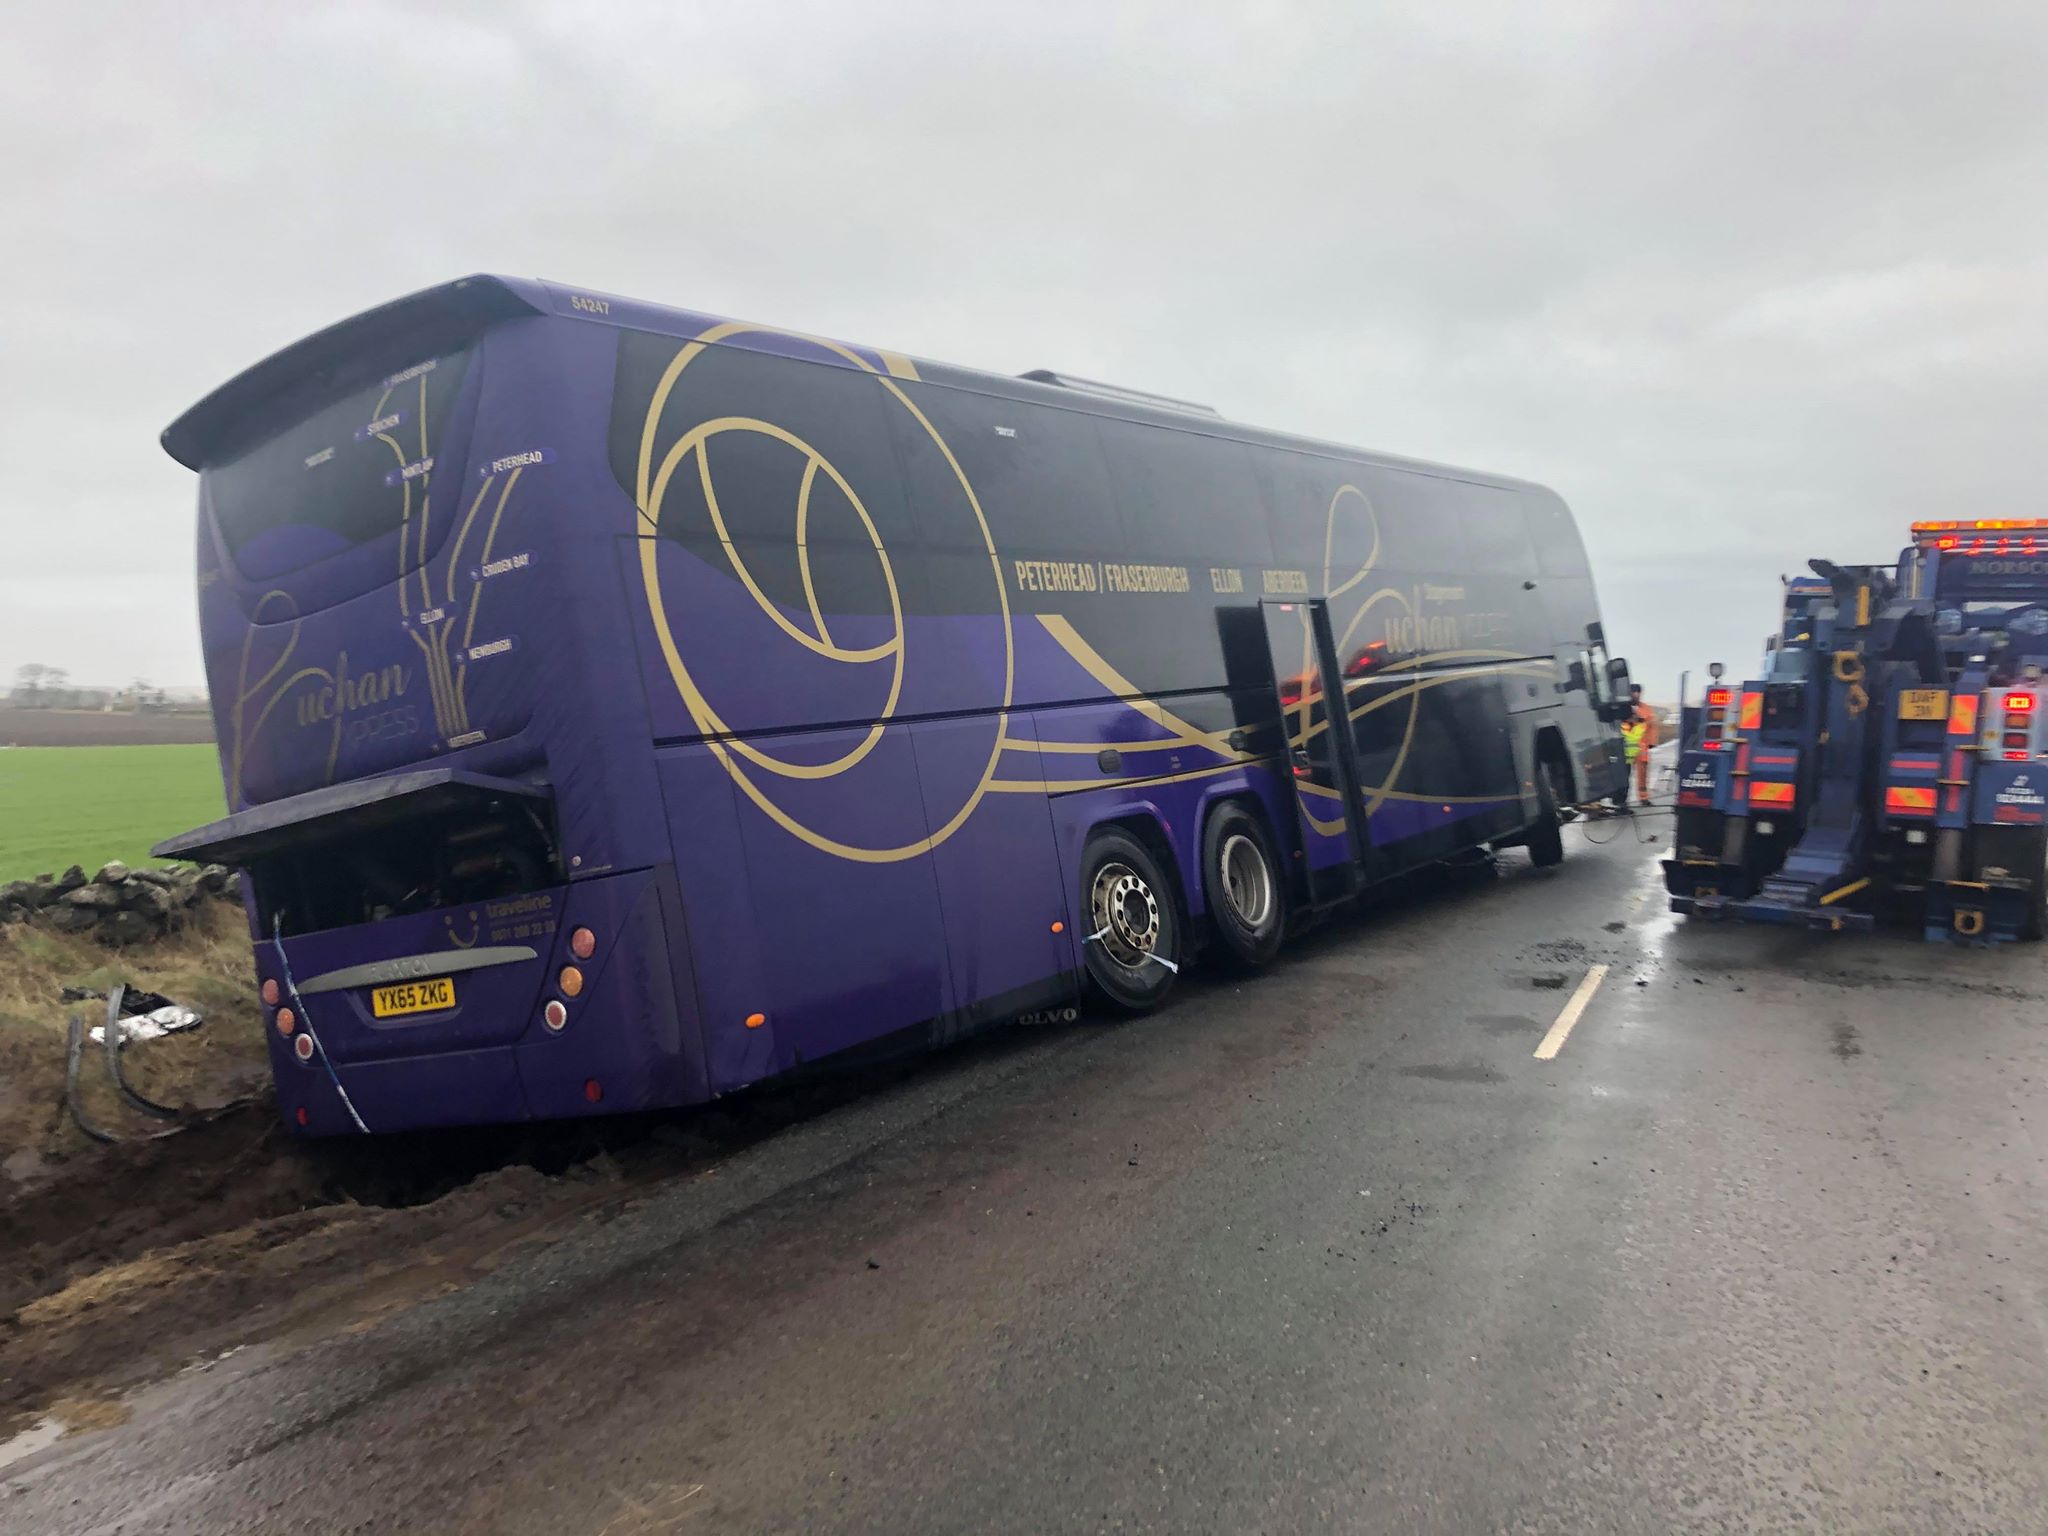 Aberdeenshire: The coach was recovered on Sunday morning.